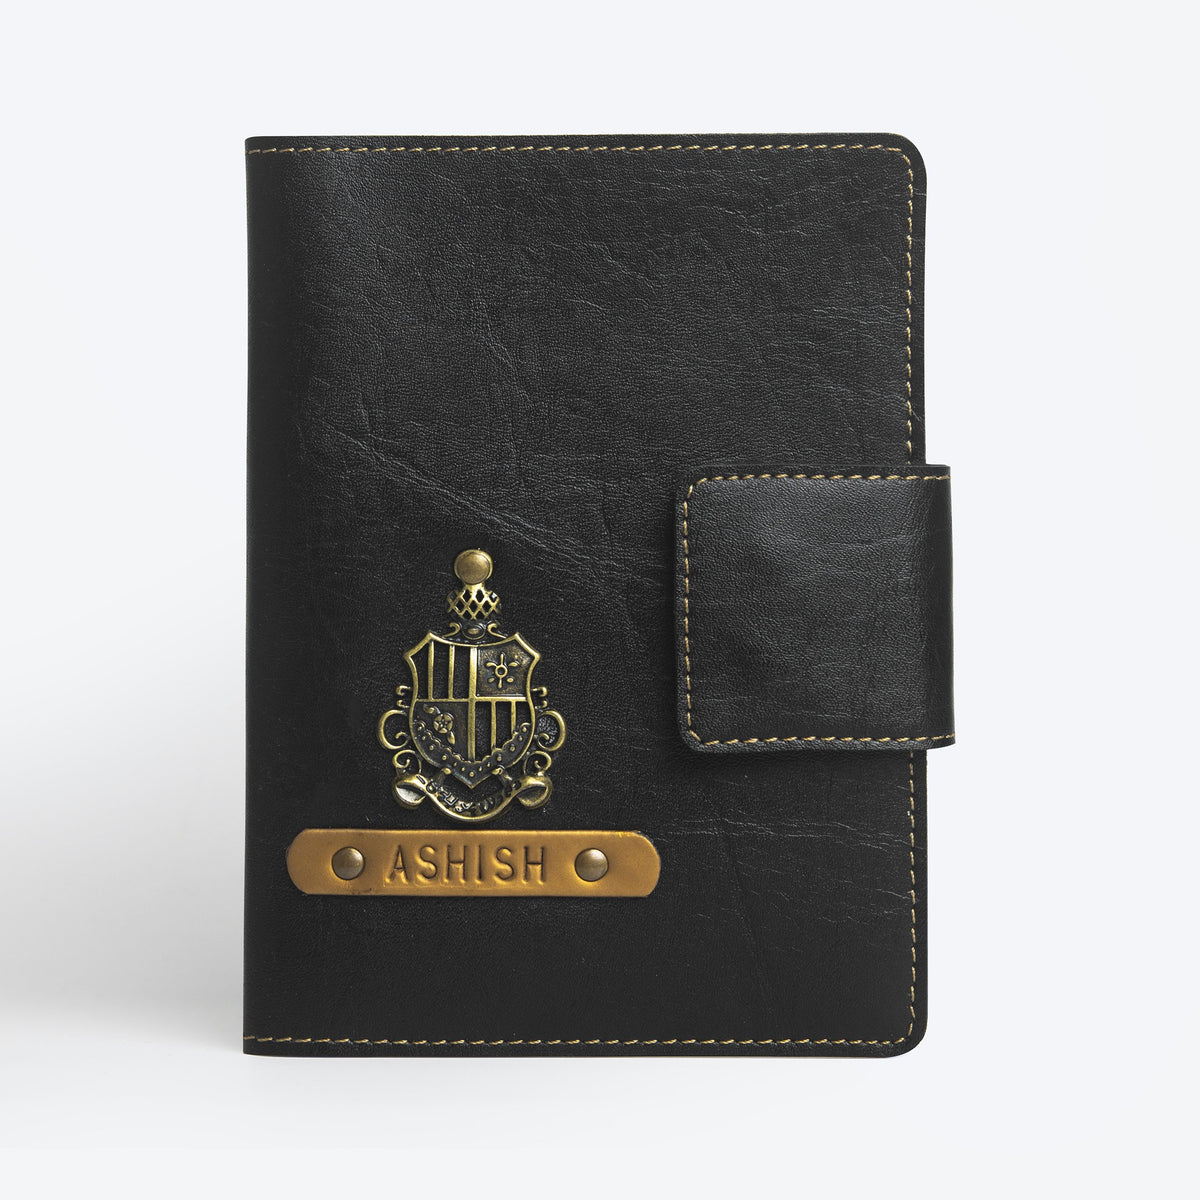 The Messy Corner Mini Travel Wallet Passport cover with button - Black